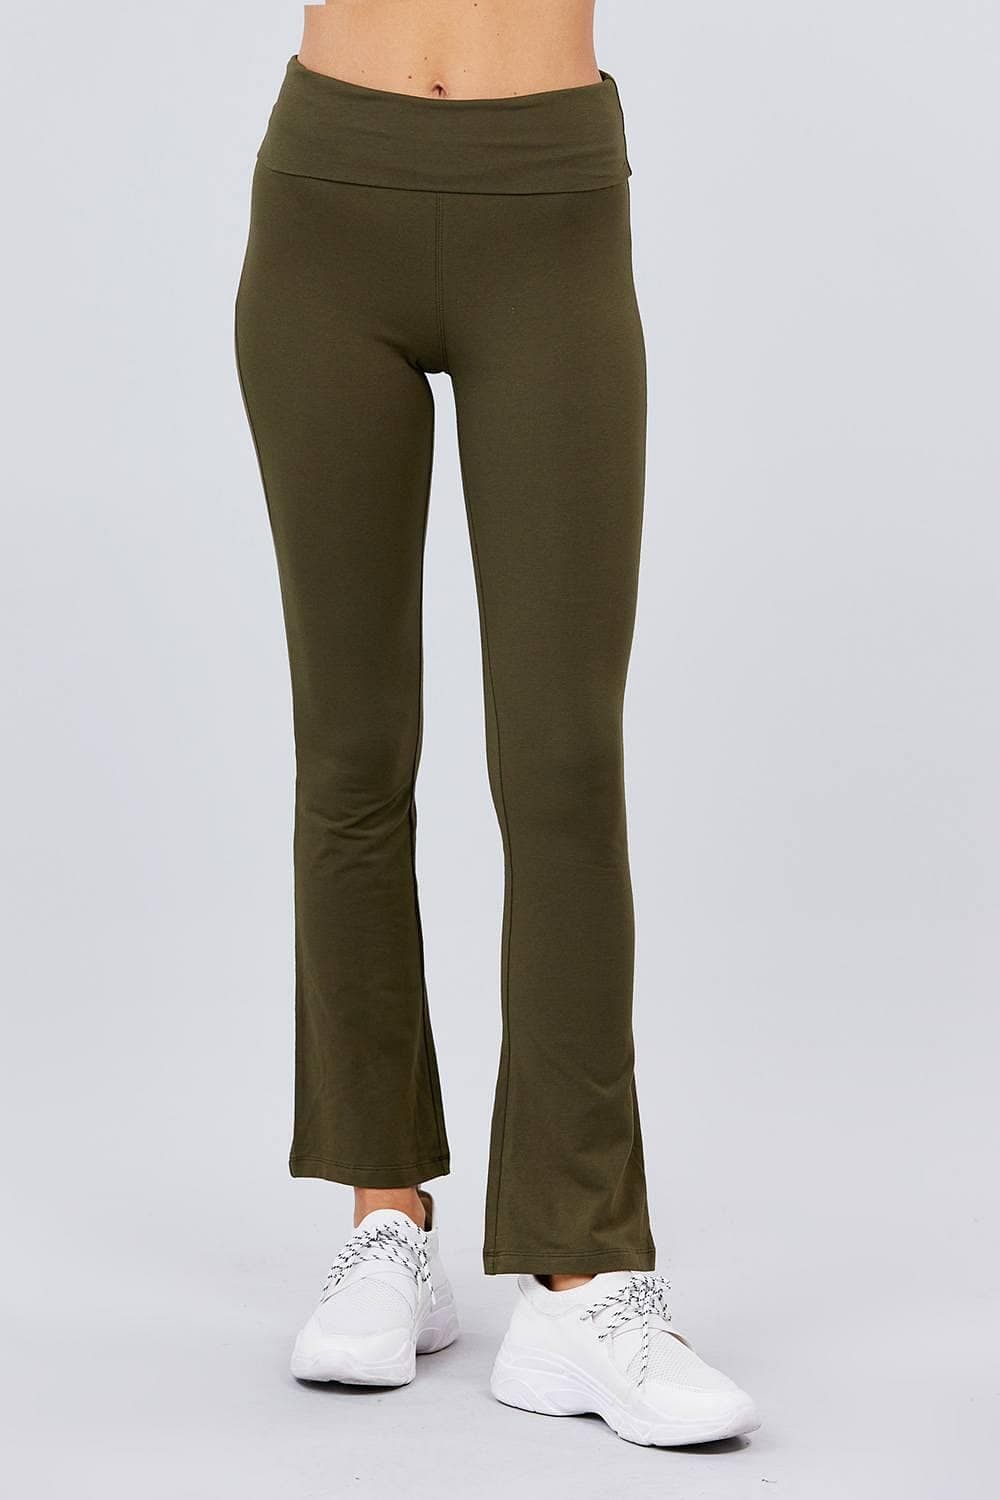 Olive Women's Yoga Leggings - Shopping Therapy S